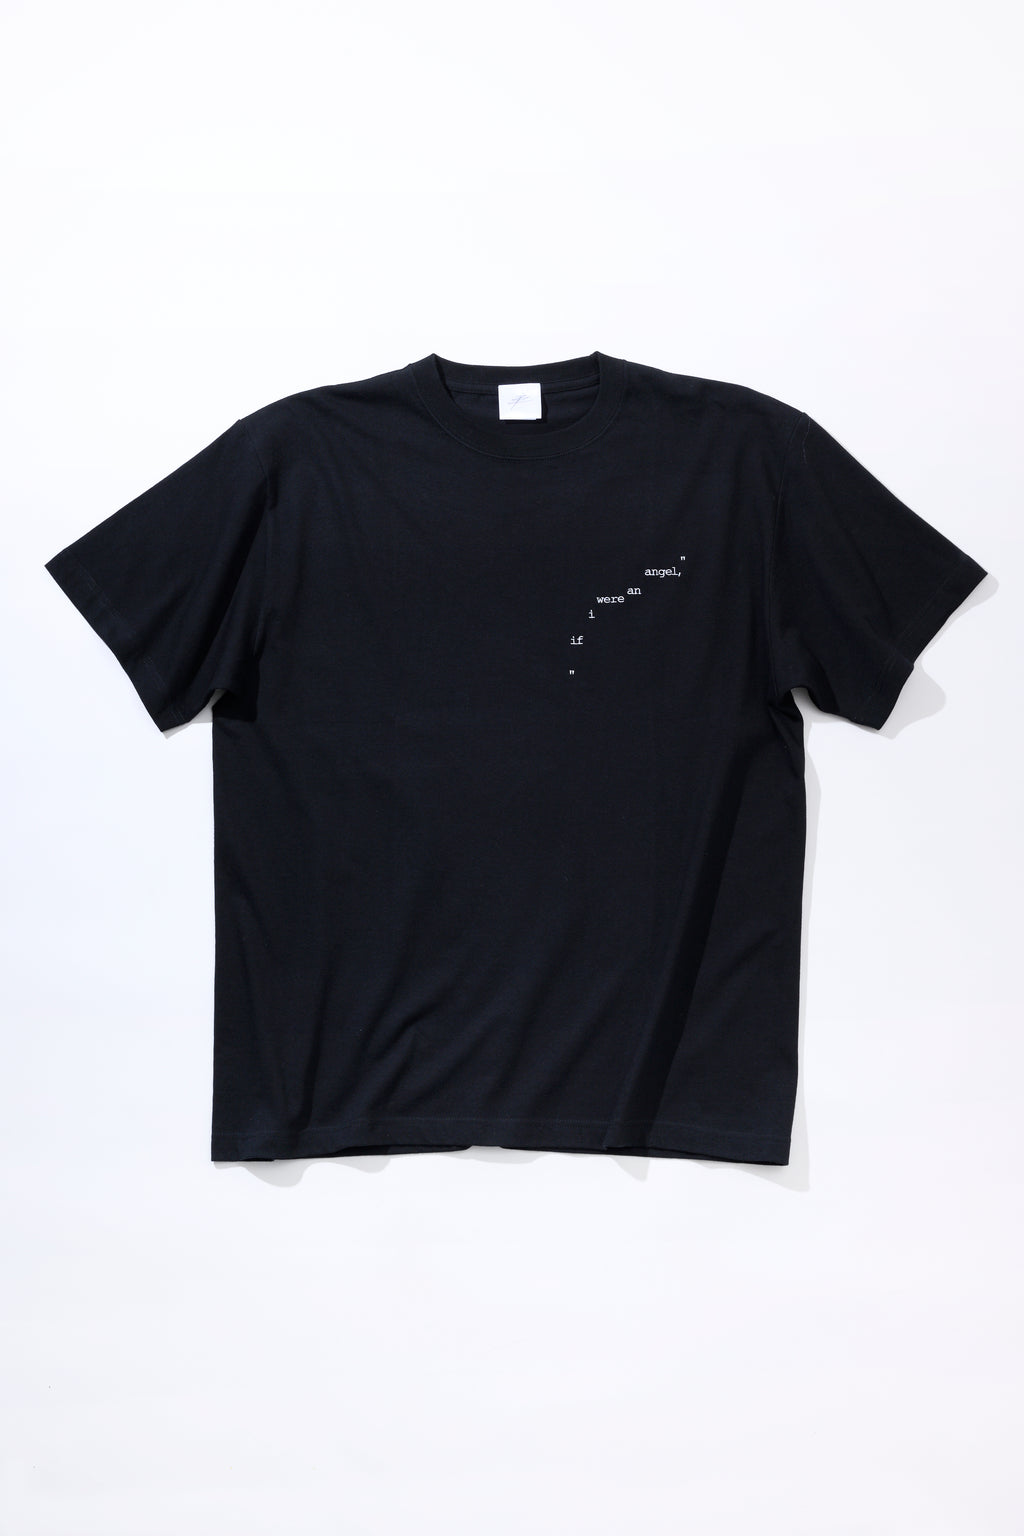 if i were an angel, Tシャツ [BLACK] – 羊文学 Official Store